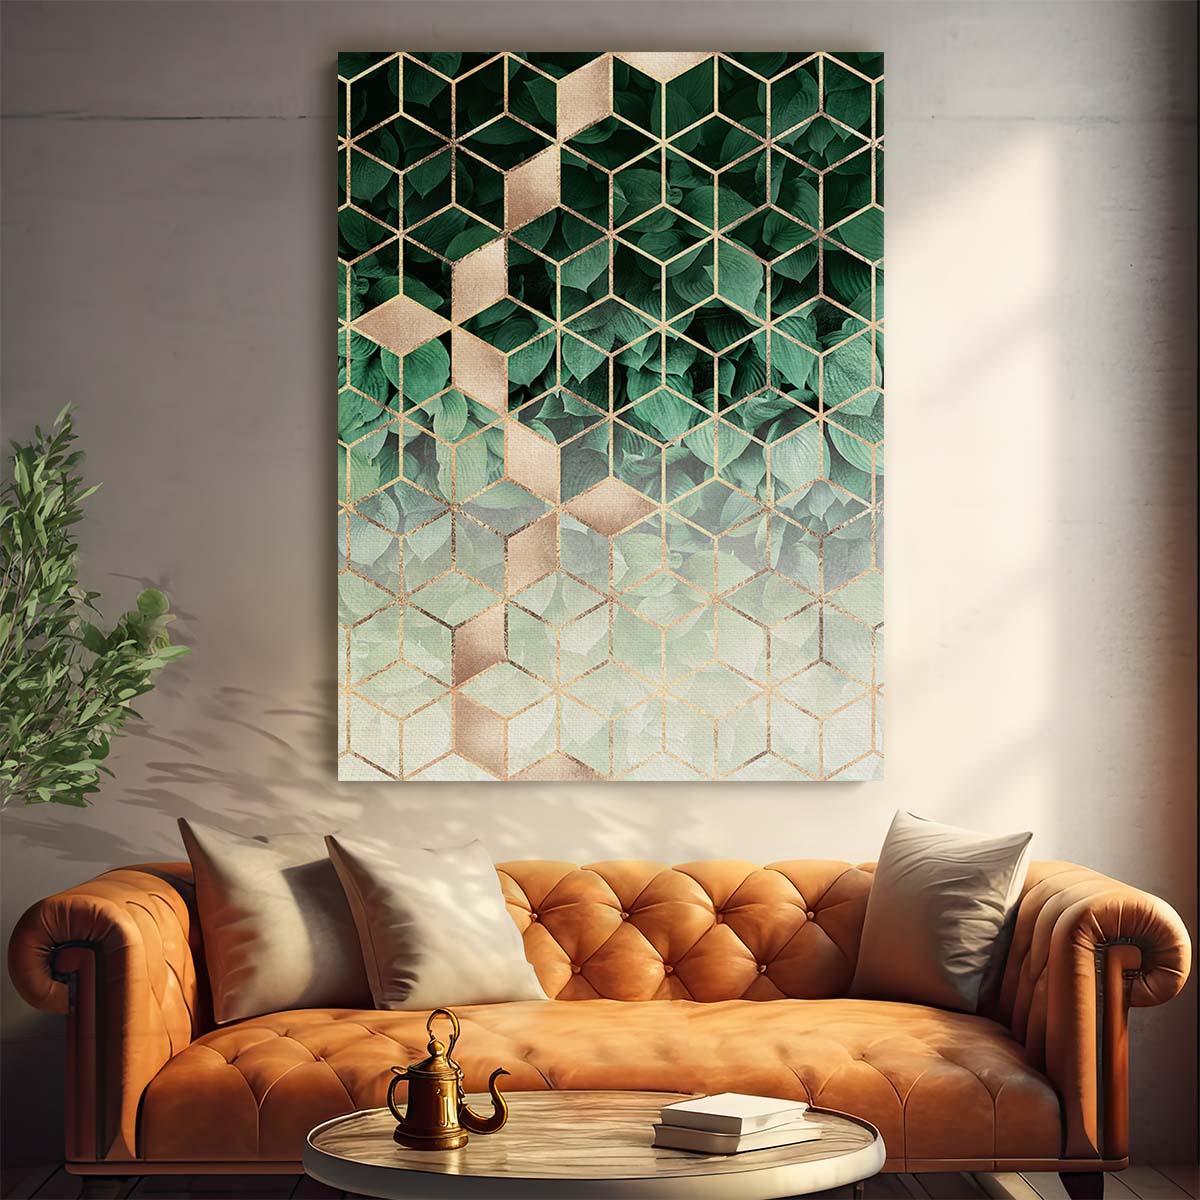 Elisabeth Fredriksson's Geometric Golden Leaf and Cube Botanical Illustration by Luxuriance Designs, made in USA